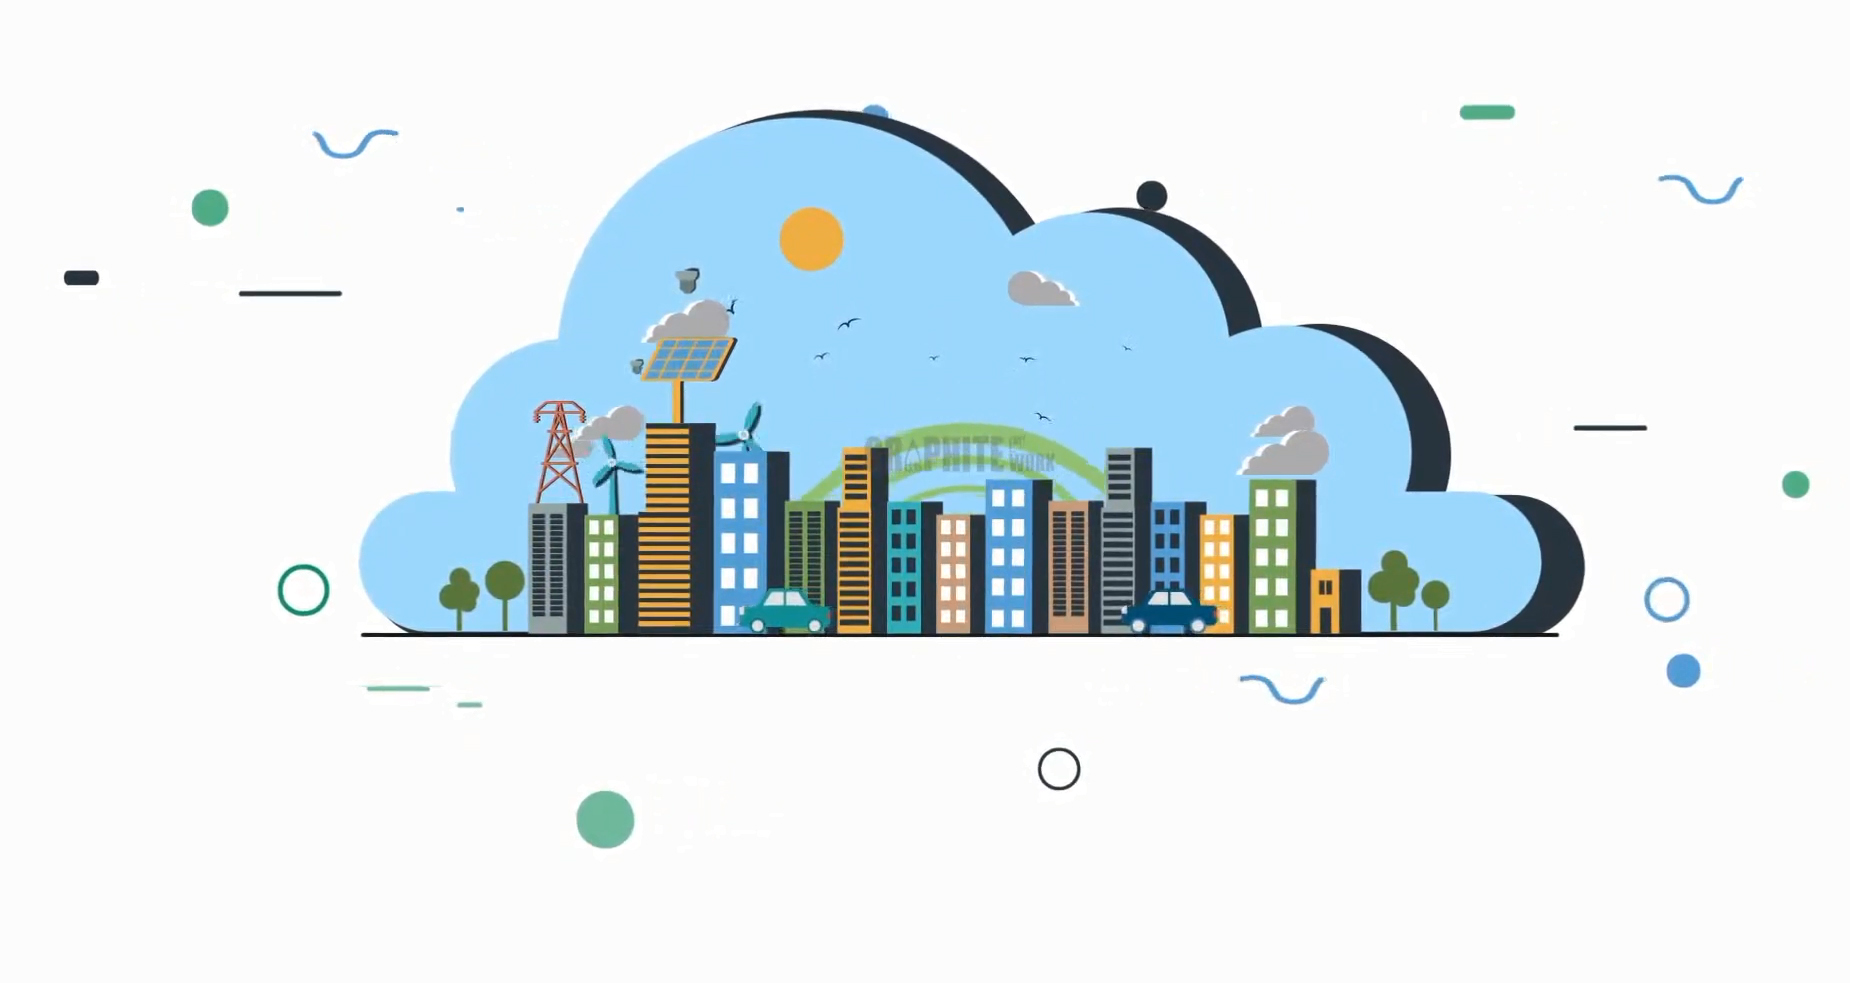 TBL Building Sciences Internet of Things Animated Explainer Video produced by Graphite Work